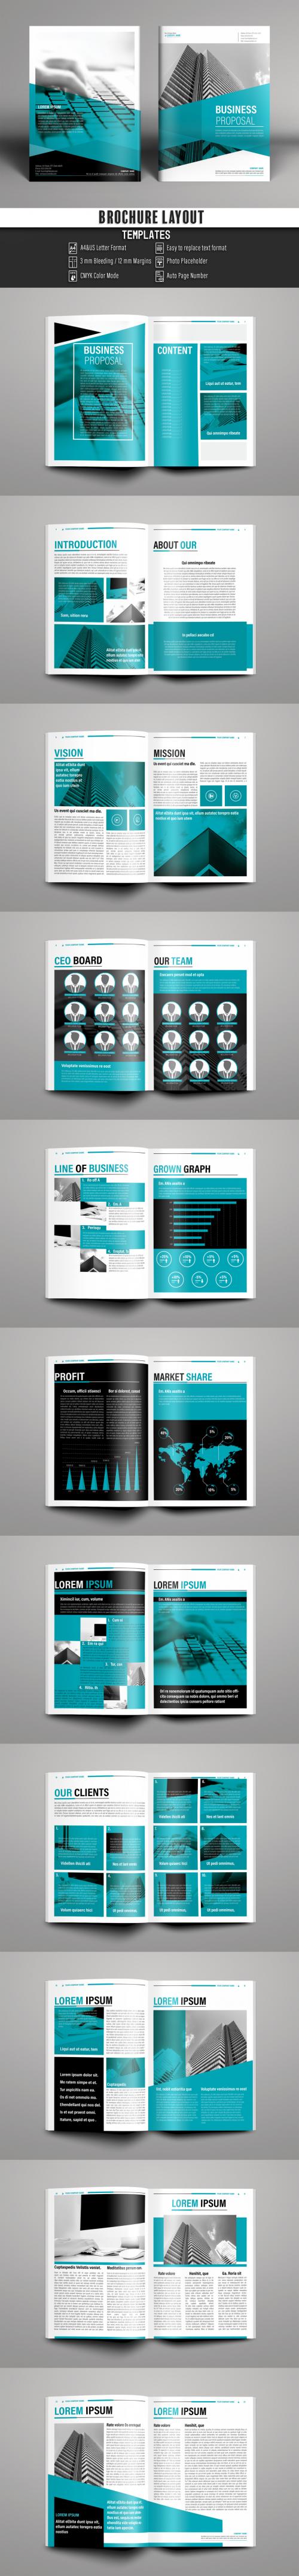 Adobe Stock - Teal Business Proposal Booklet Layout - 163413711